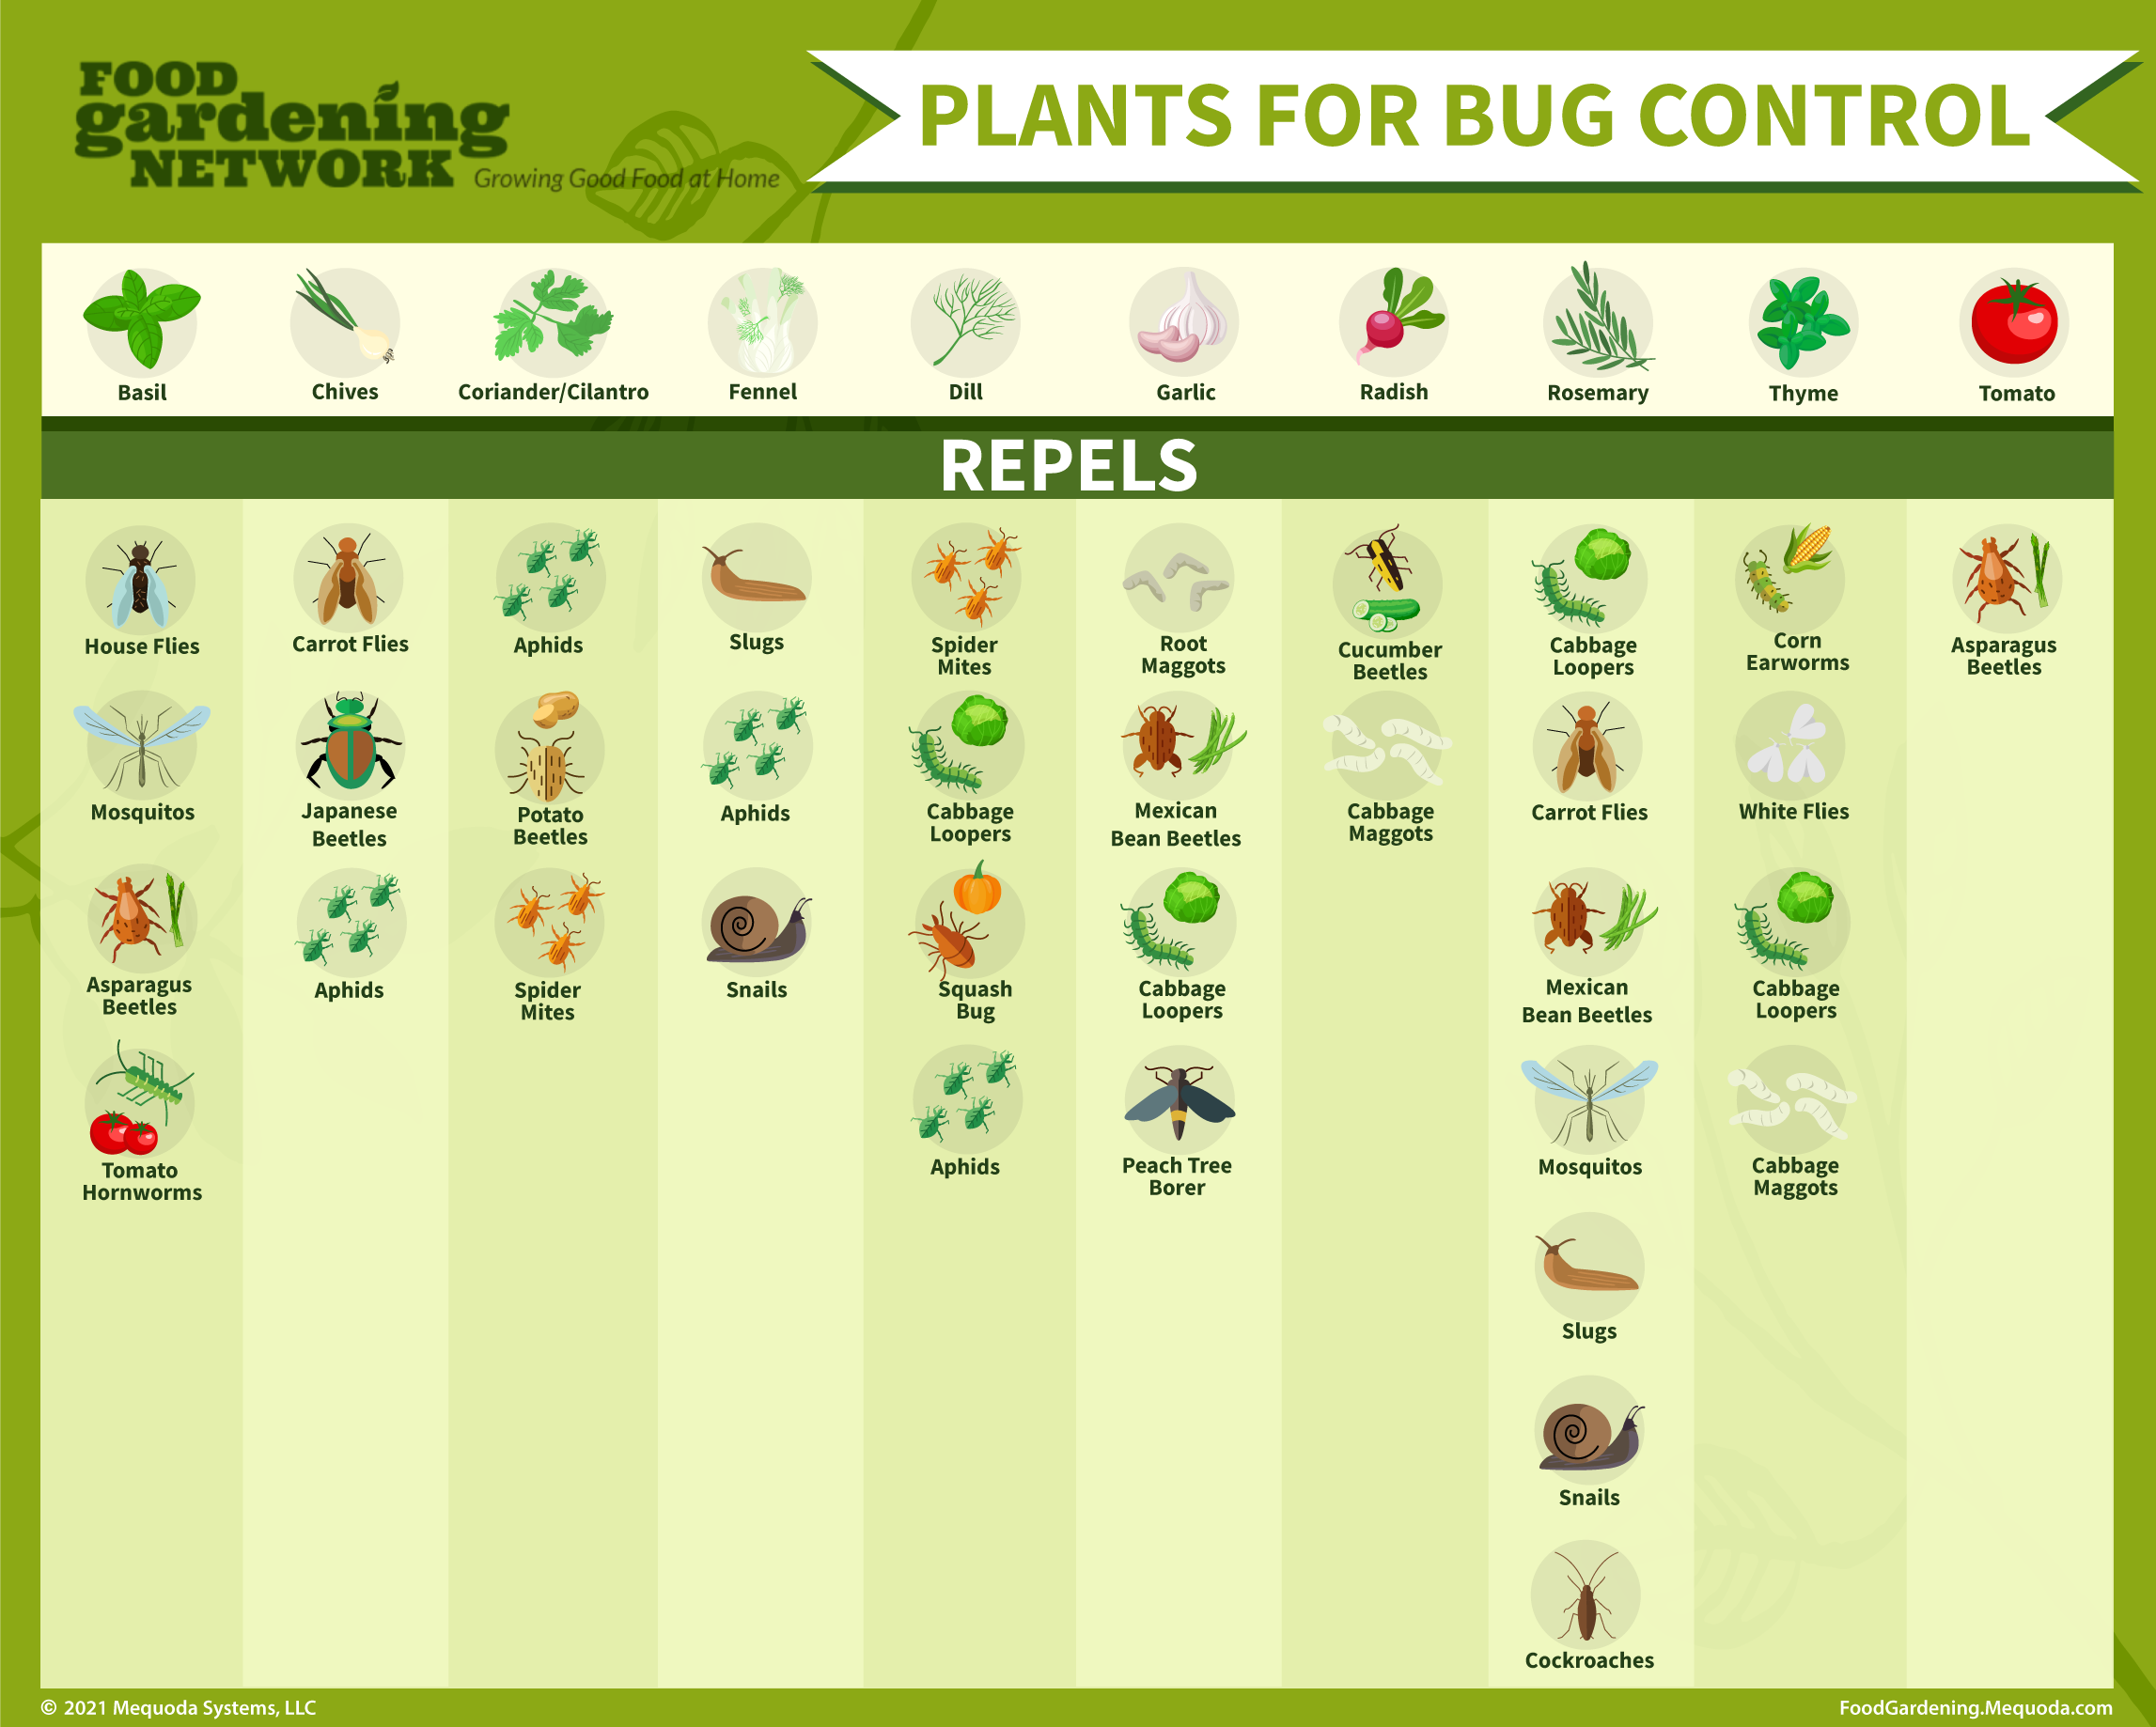 Plants for Bug Control